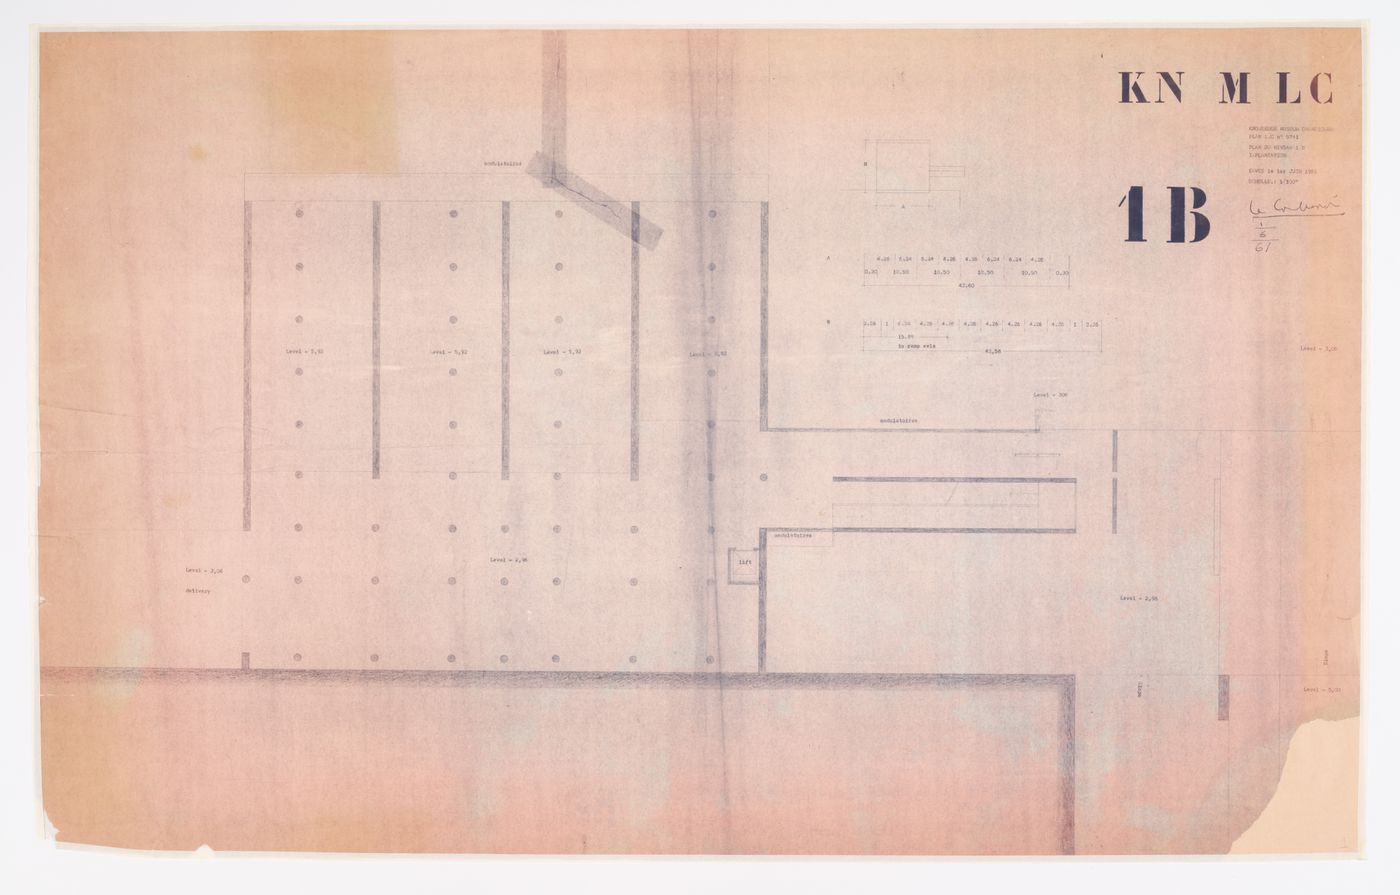 Floor plan for the Museum of Knowledge in Chandigarh, India